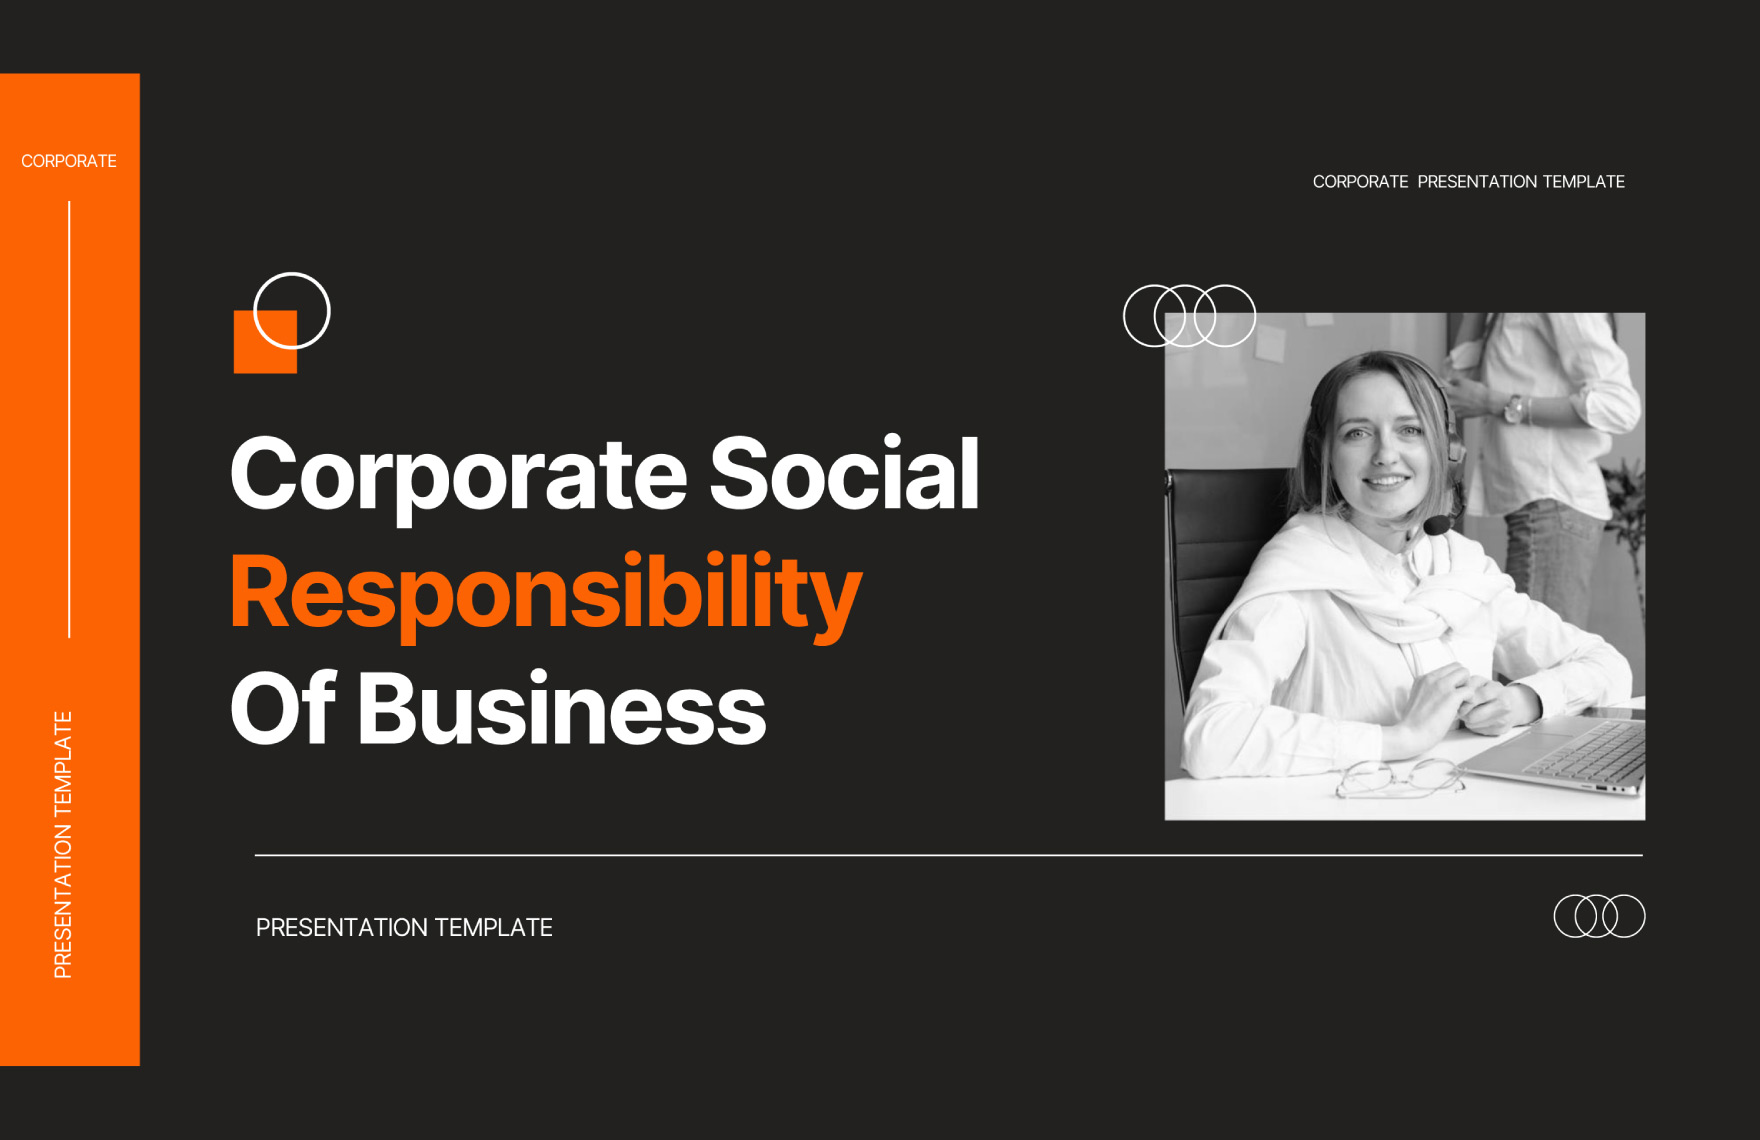 Corporate Social Responsibility of Business Template